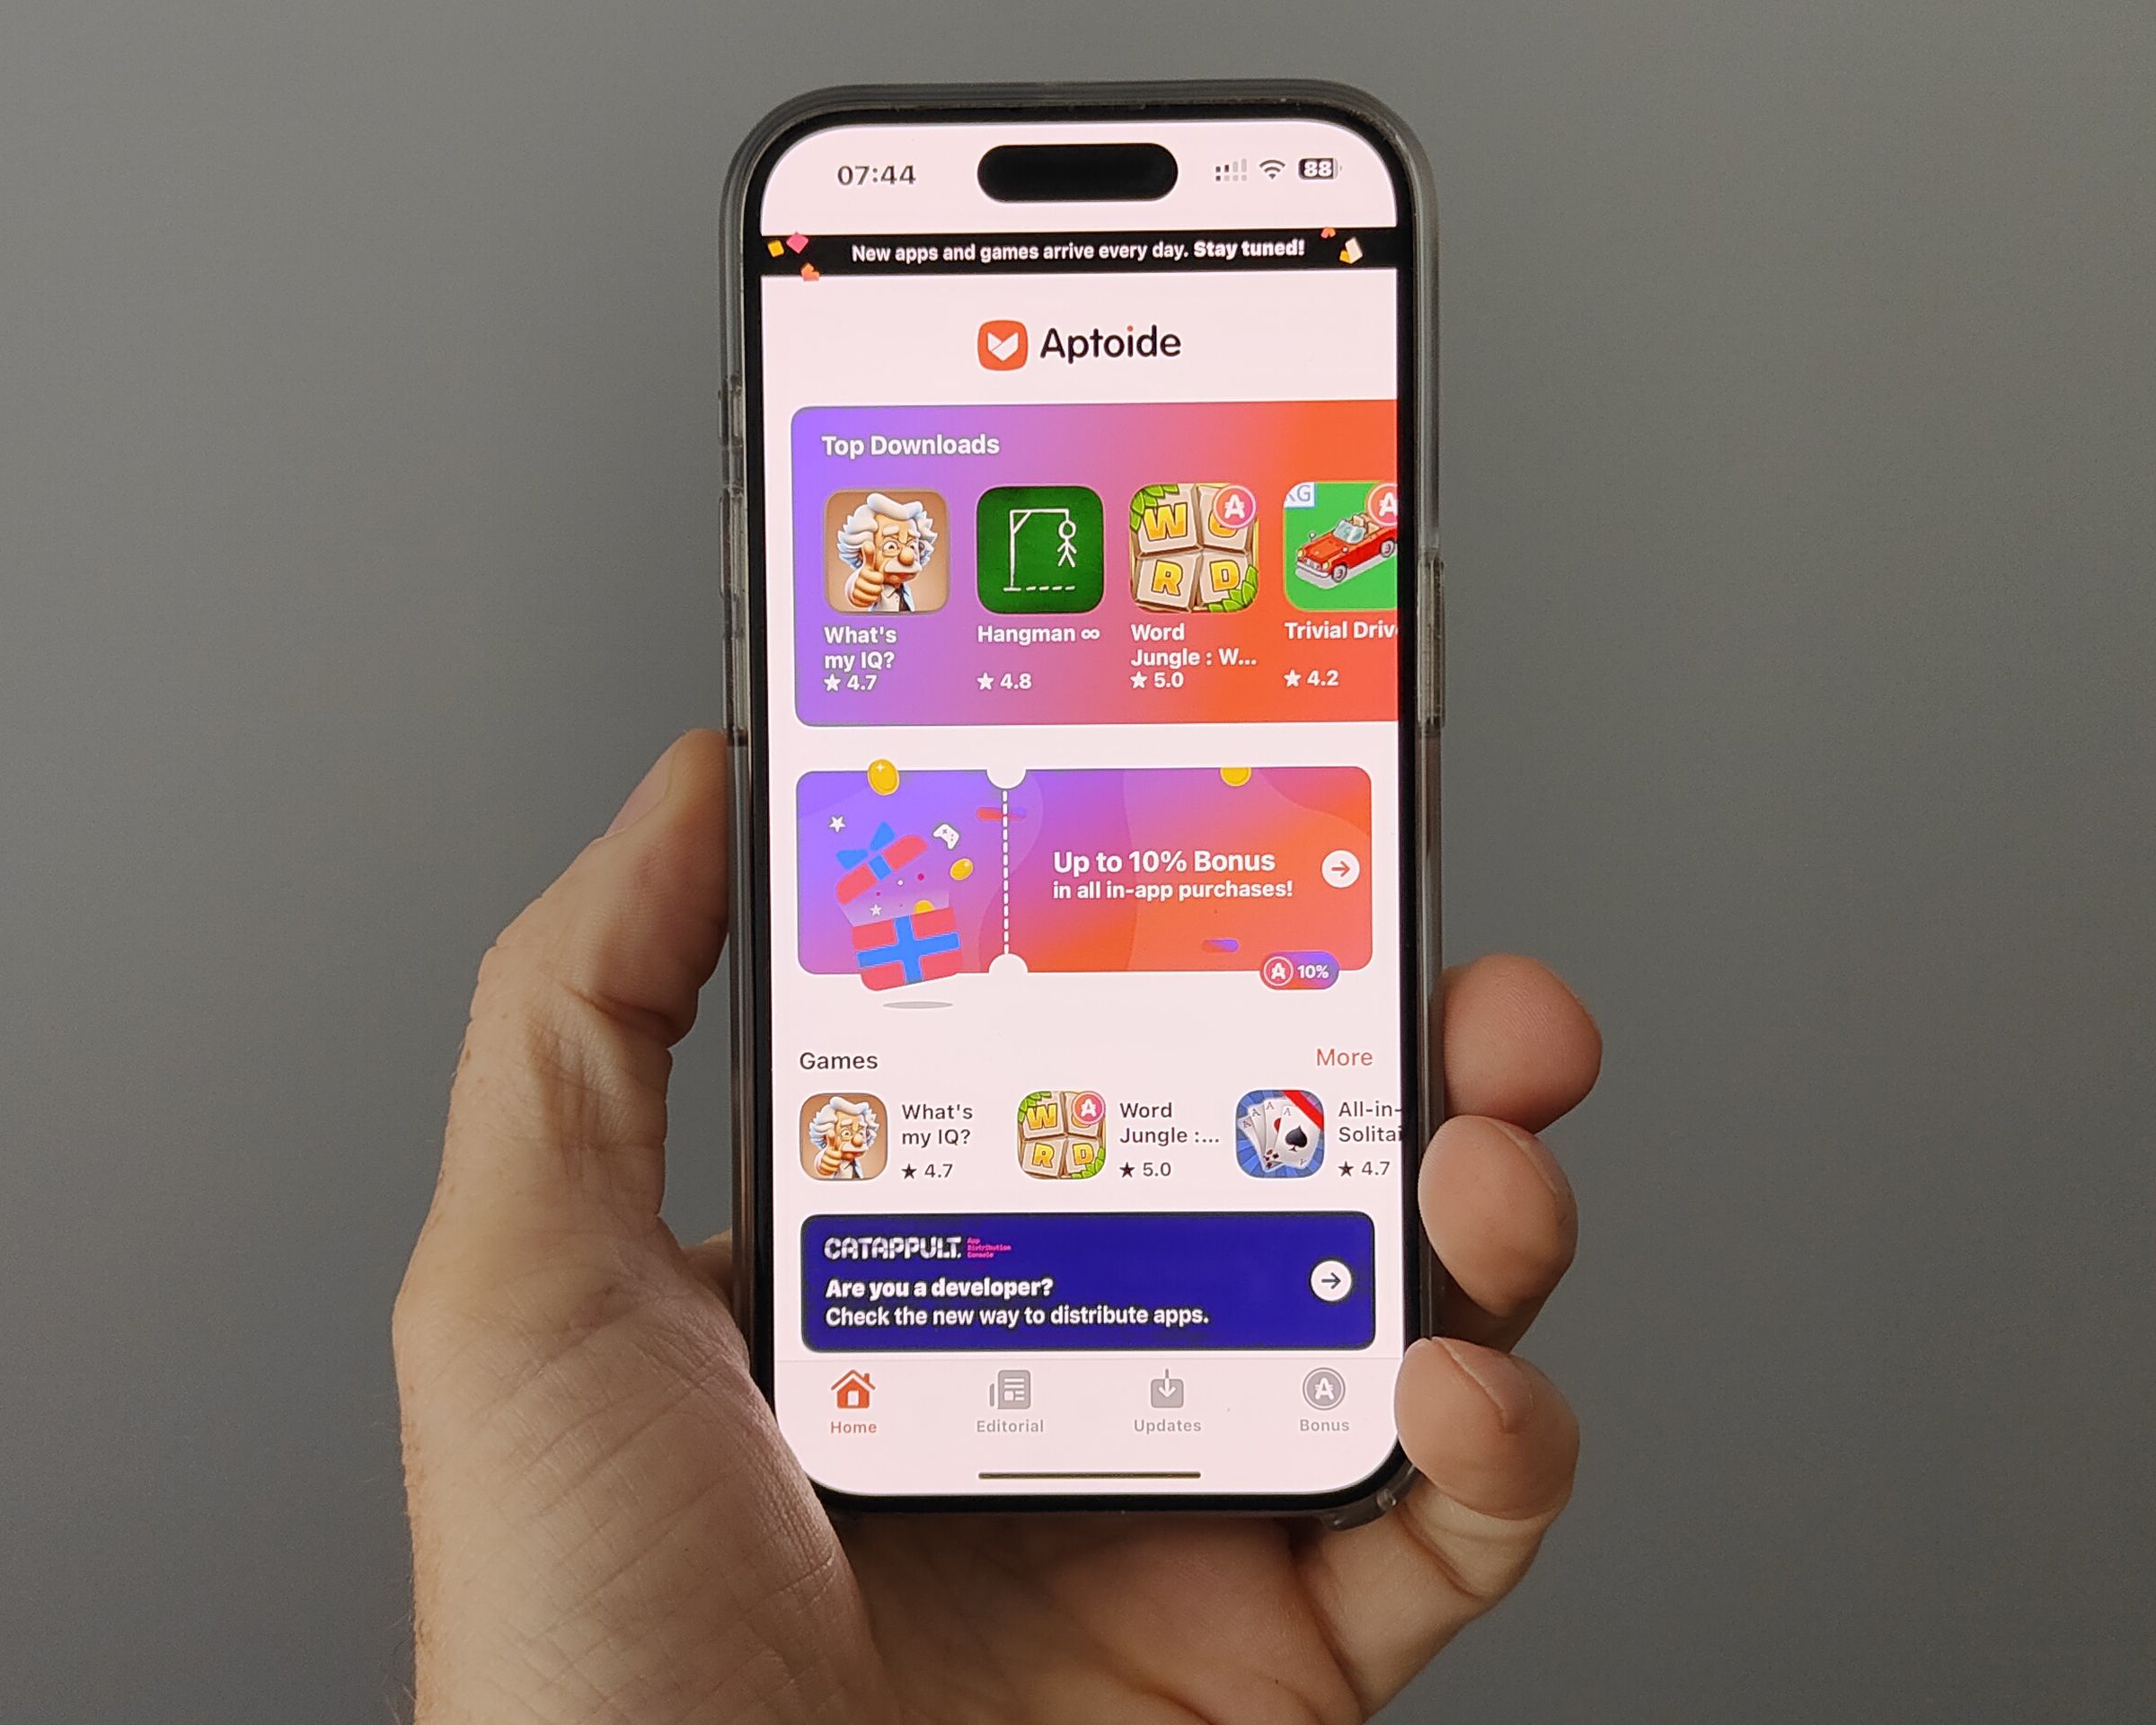 An iPhone held aloft in one hand shows the Aptoide iOS game store landing page full of colorful icons for the few games available.